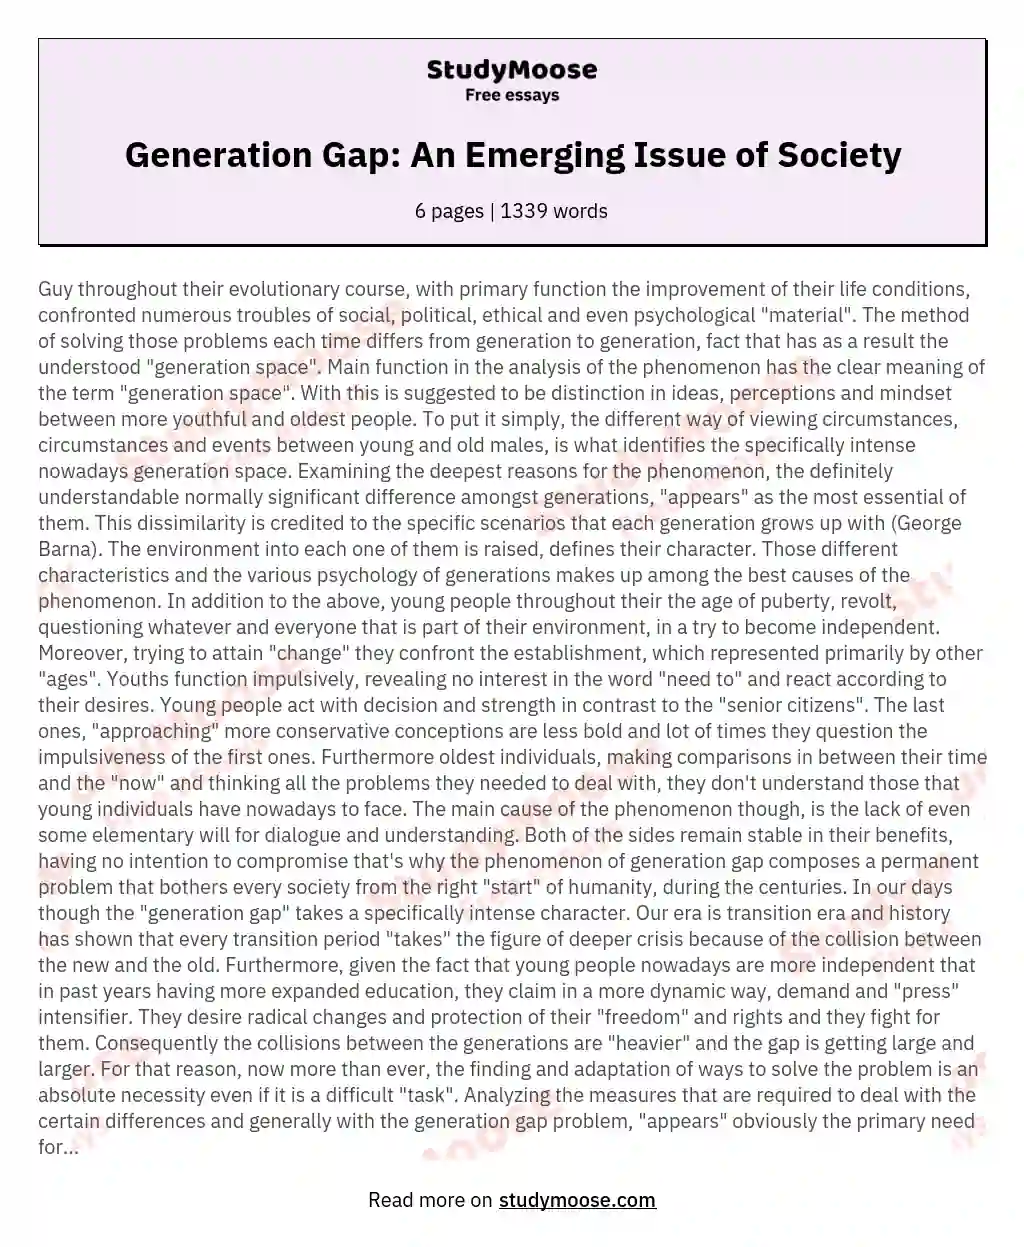 Generation Gap: An Emerging Issue of Society